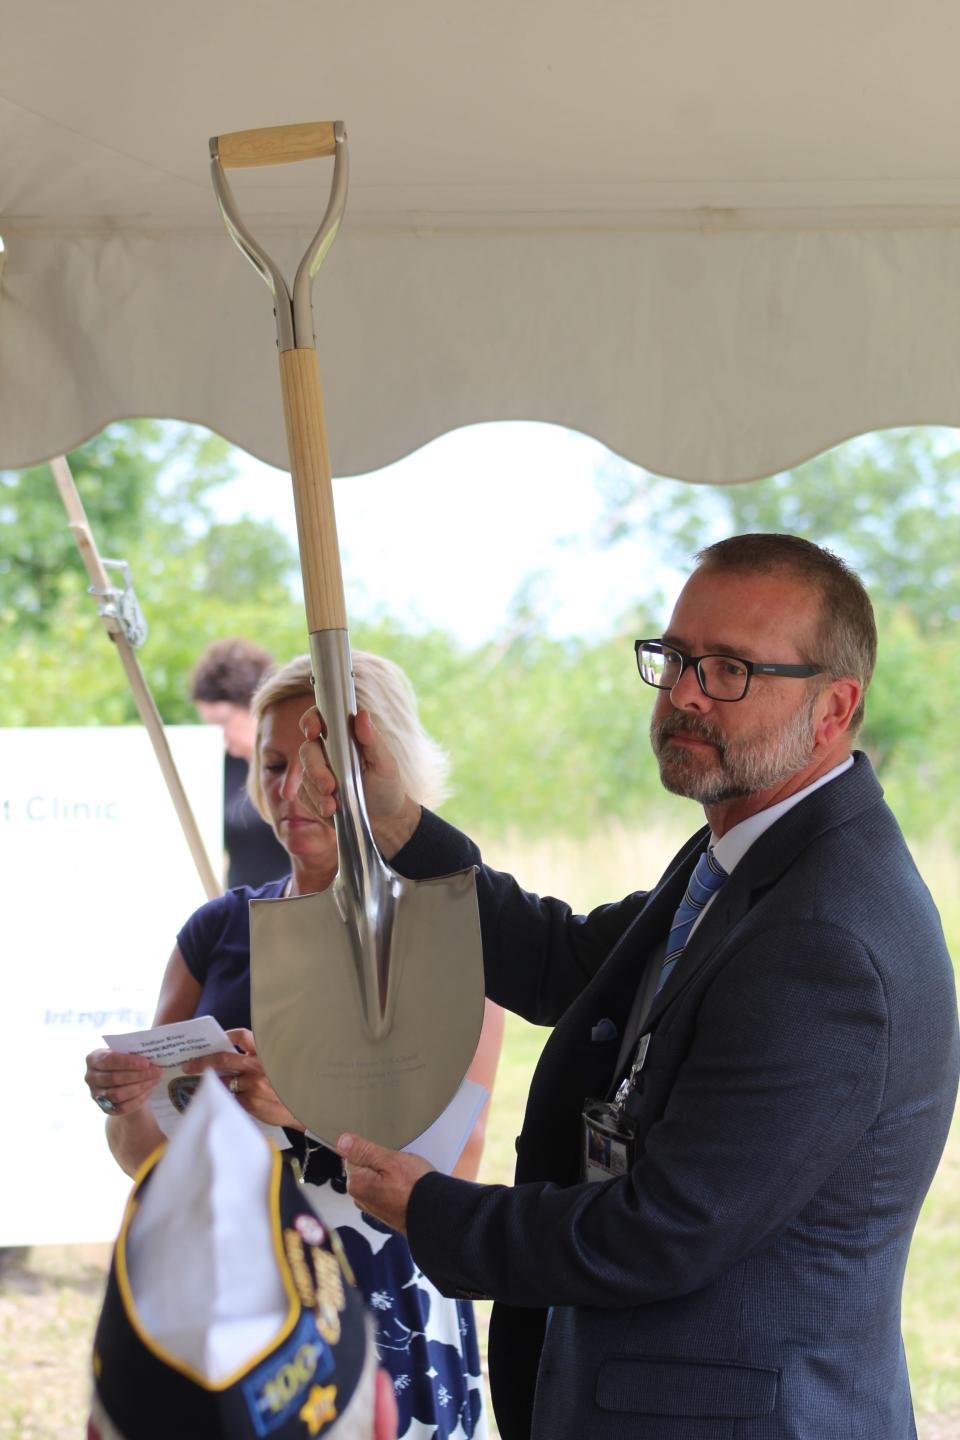 VA Medical Center Director Chris Cauley presents a ceremonial shovel during a groundbreaking ceremony on the new CBOC in Indian River.